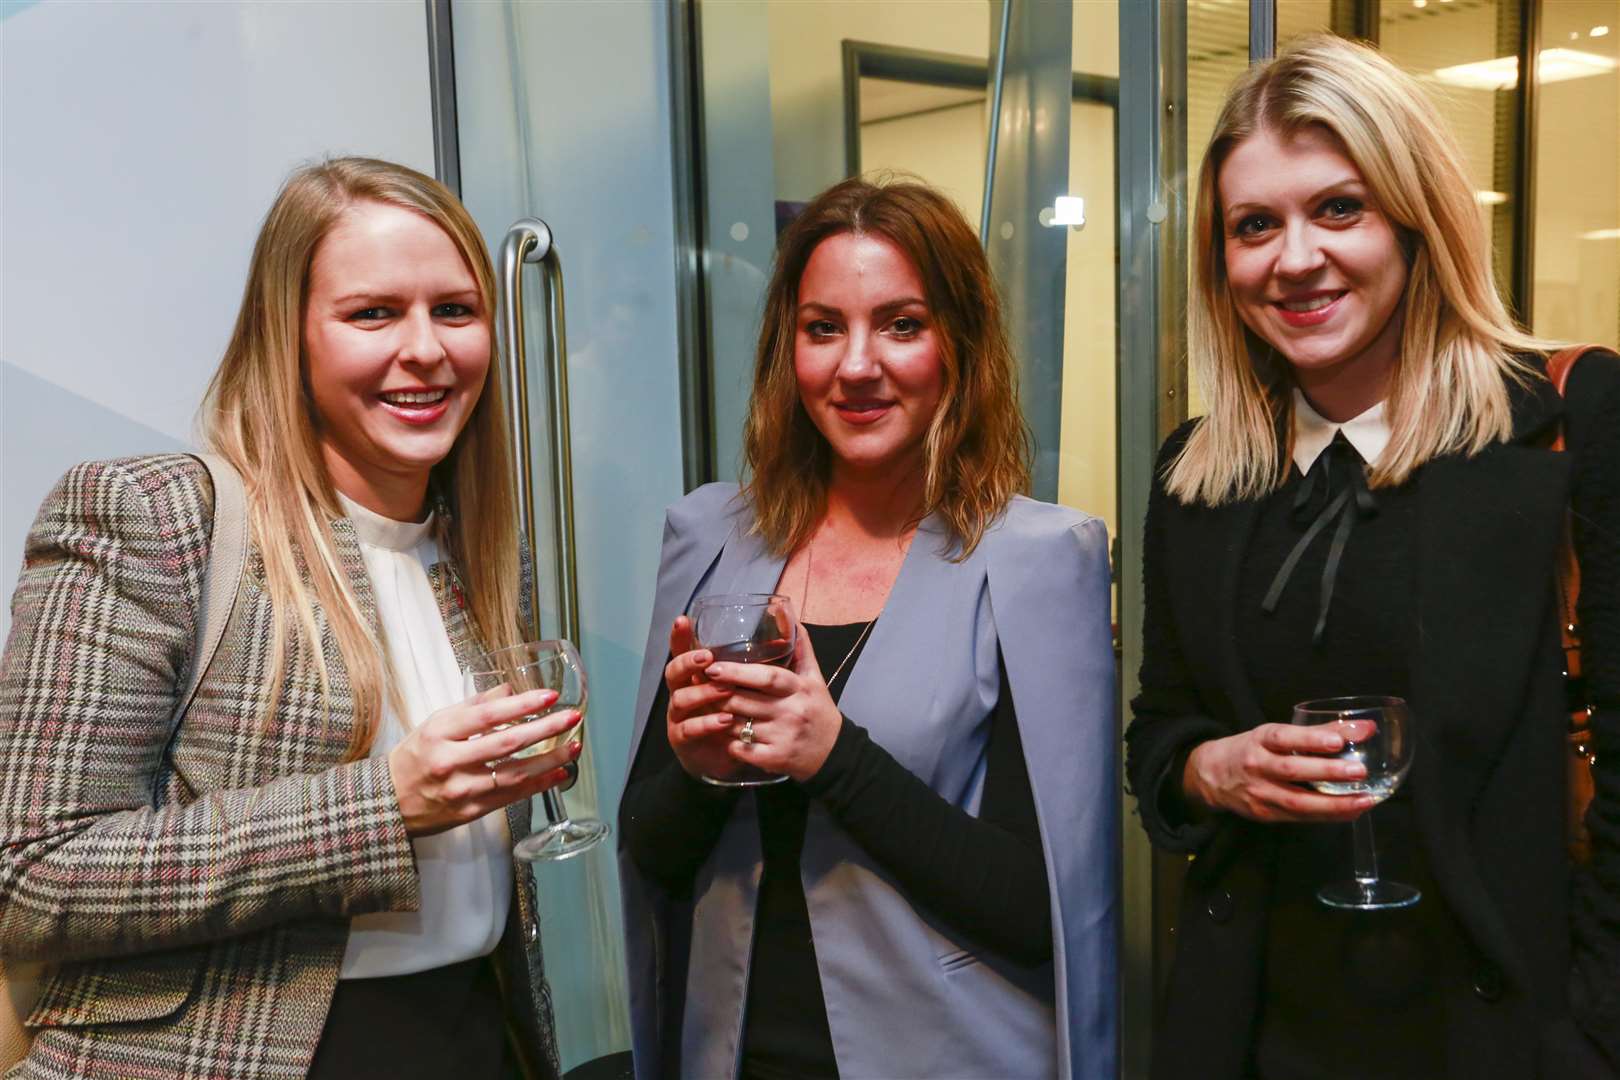 From left, Becky Campbell of Reflect Digital, Amy Barker of Monks Clothing and Sally Buckle of Reflect Digital